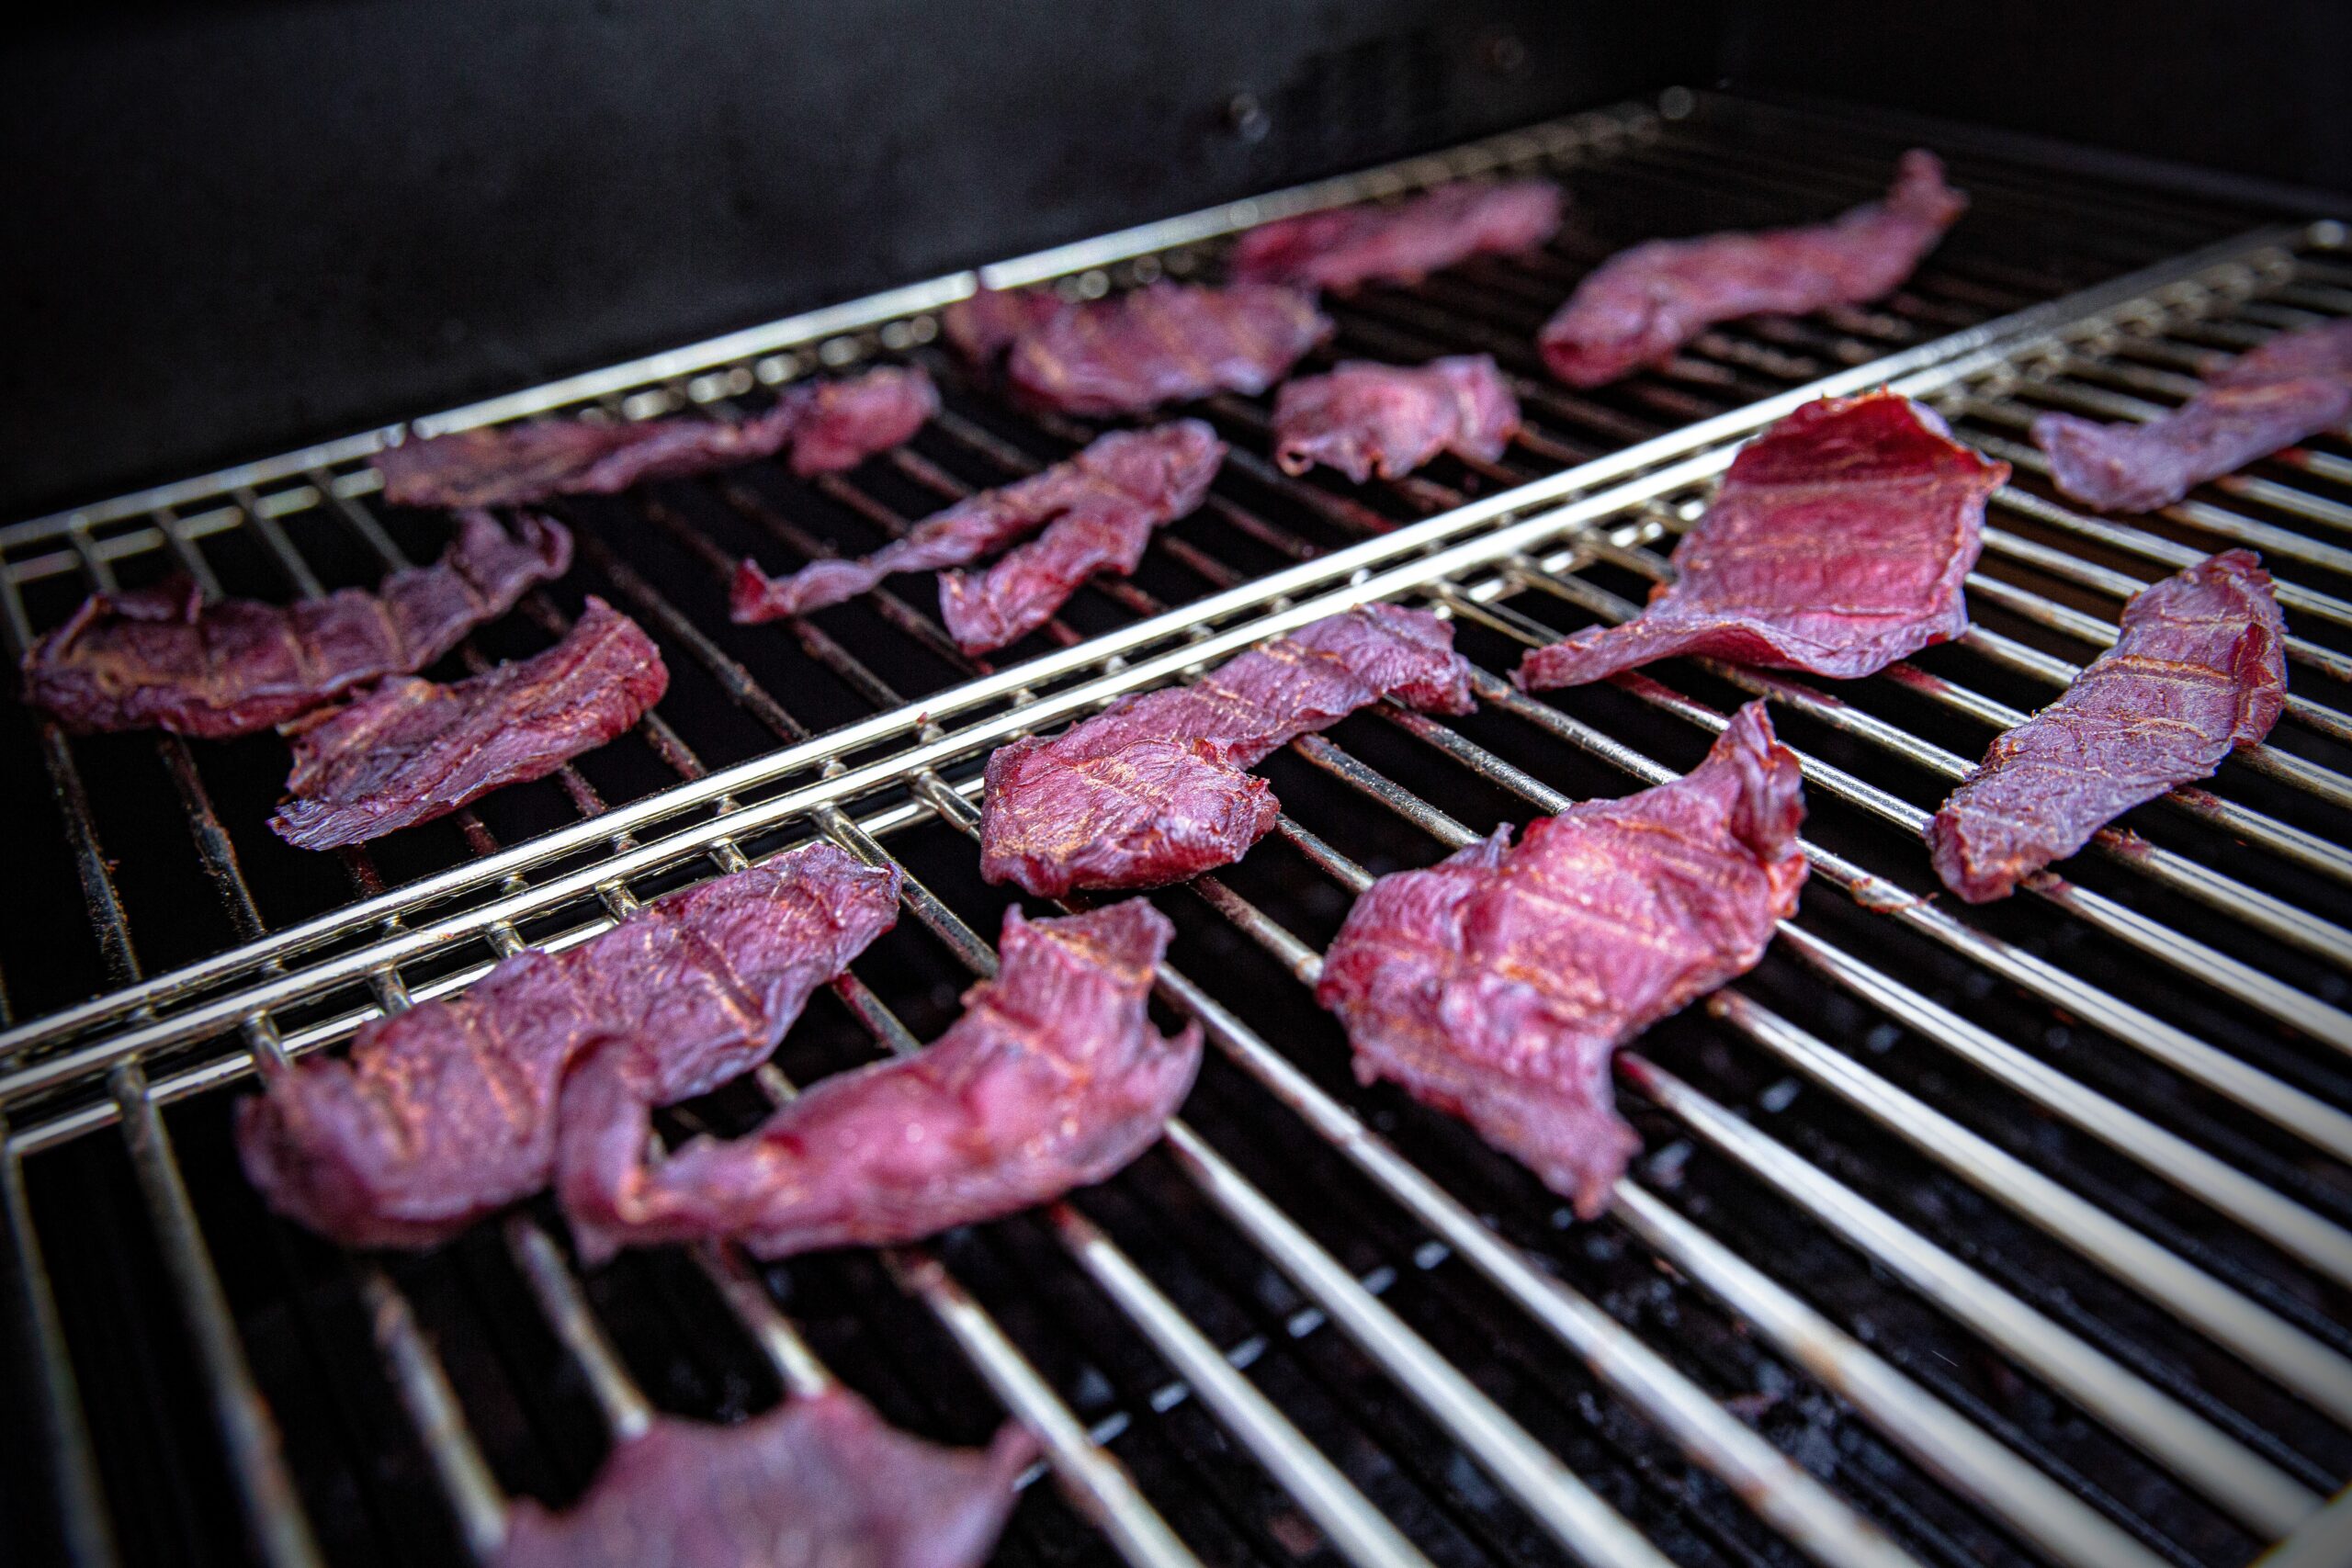 Smoked jerky is considered more flavorful, but using a dehydrator gives you more consistency in the texture of the meat.